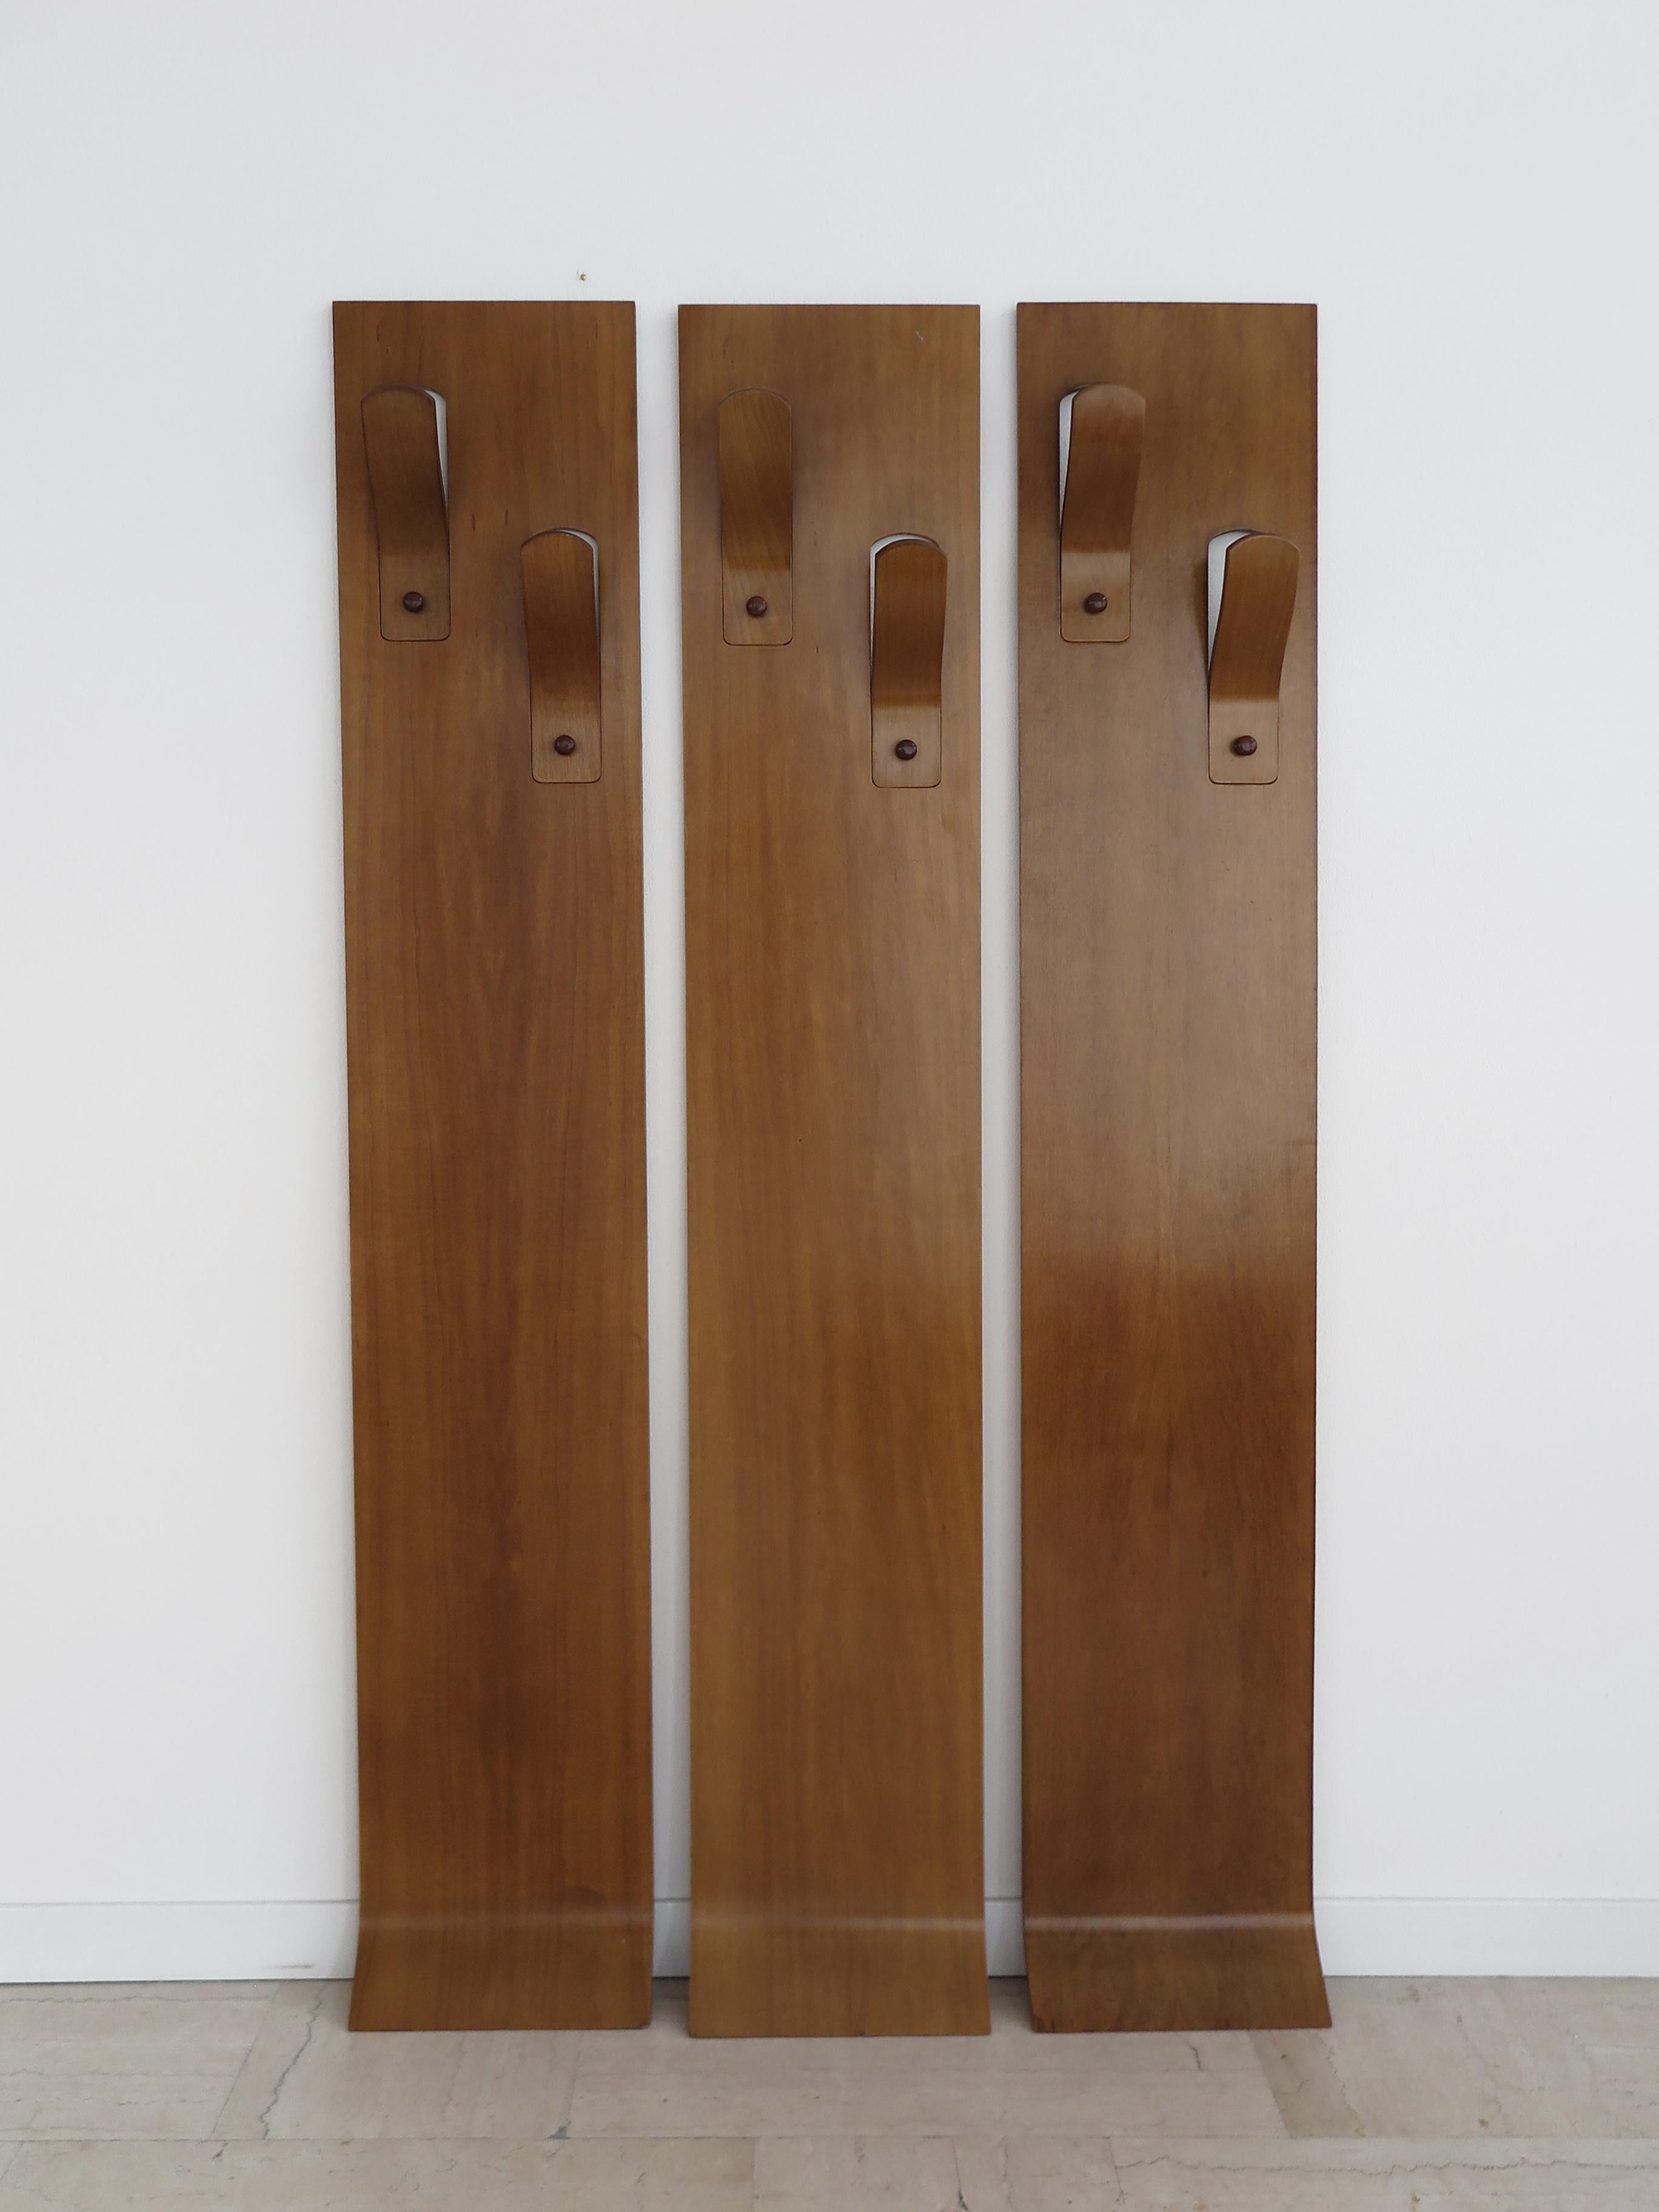 Set of three italian midcentury wooden wall coat racks, production Italy 1960s

Please note that the lset is original of the period and this shows normal signs of age and use.